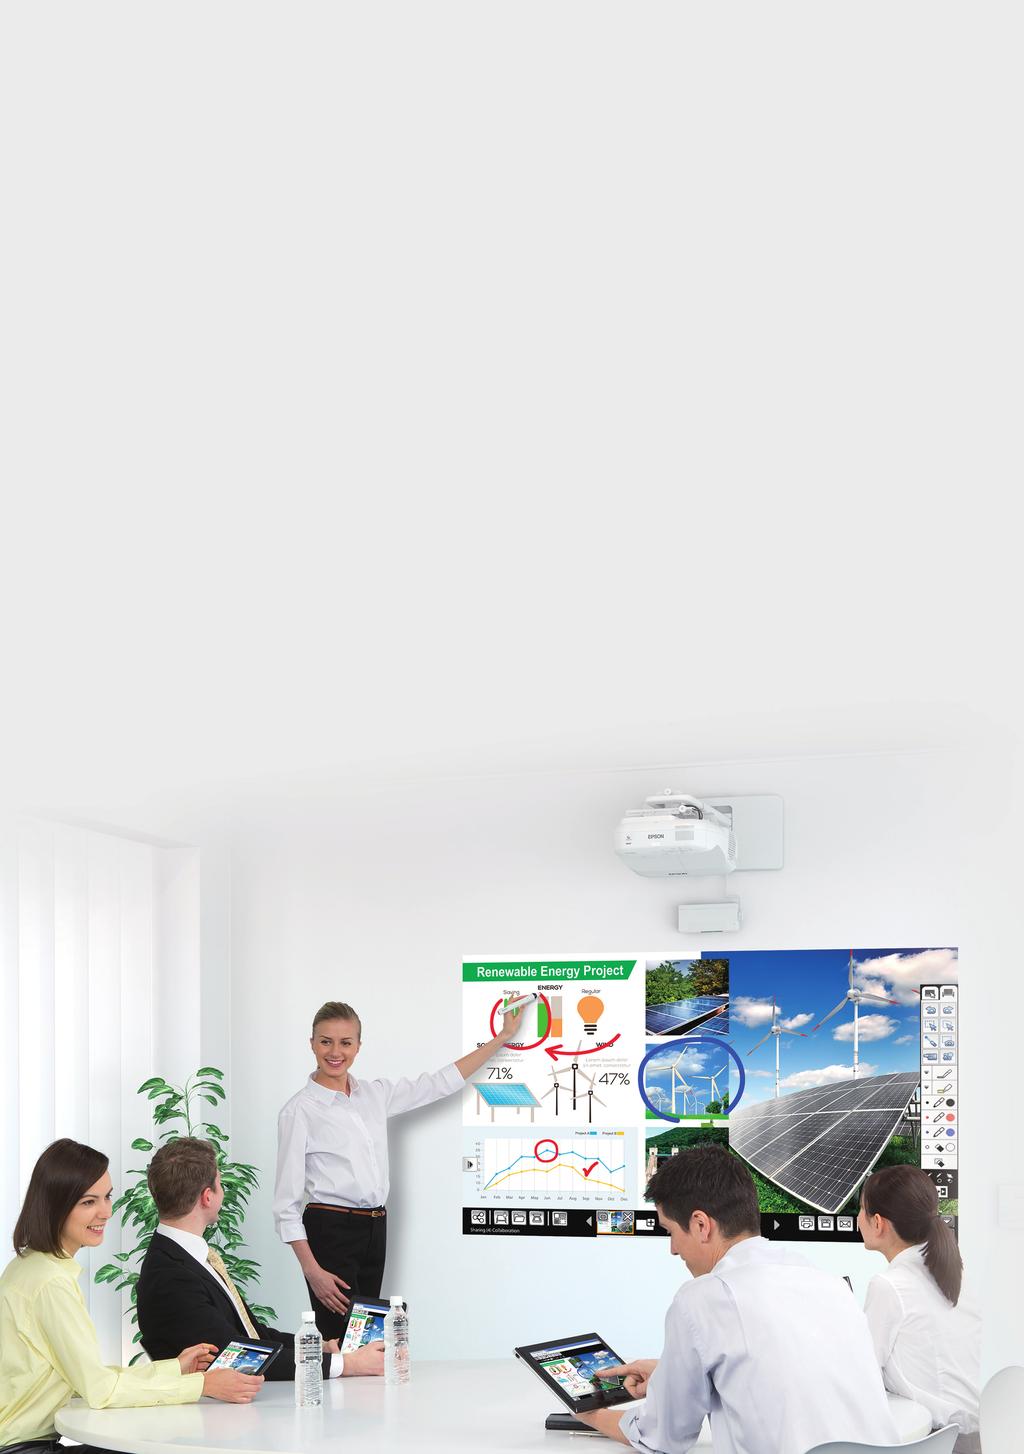 GET MORE FROM YOUR PROJECTOR Let your projector reach its full potential Take advantage of Epson s specialist software solutions to enrich your projector and benefit from increased capabilities,